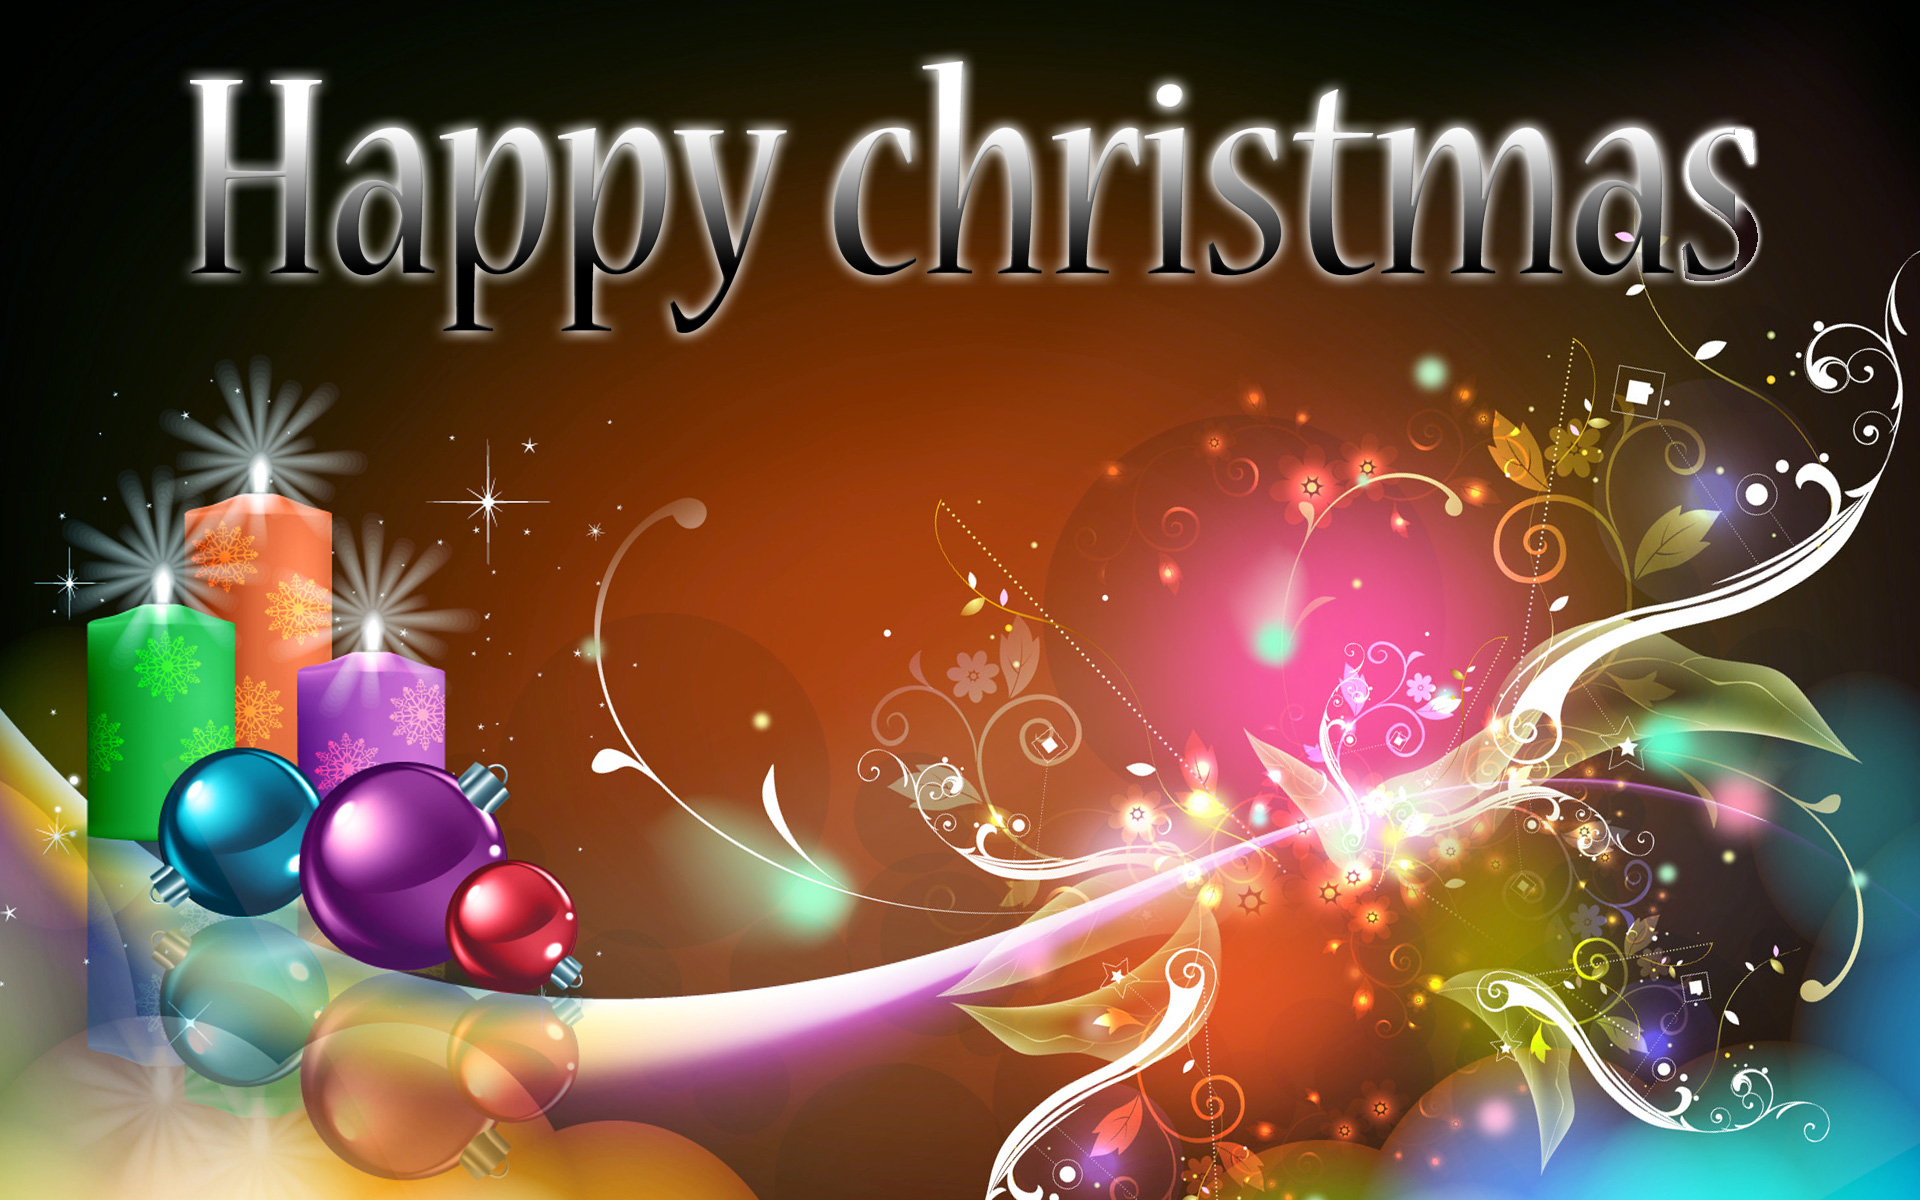 Merry Christmas HD Geous Wallpaper Gallery